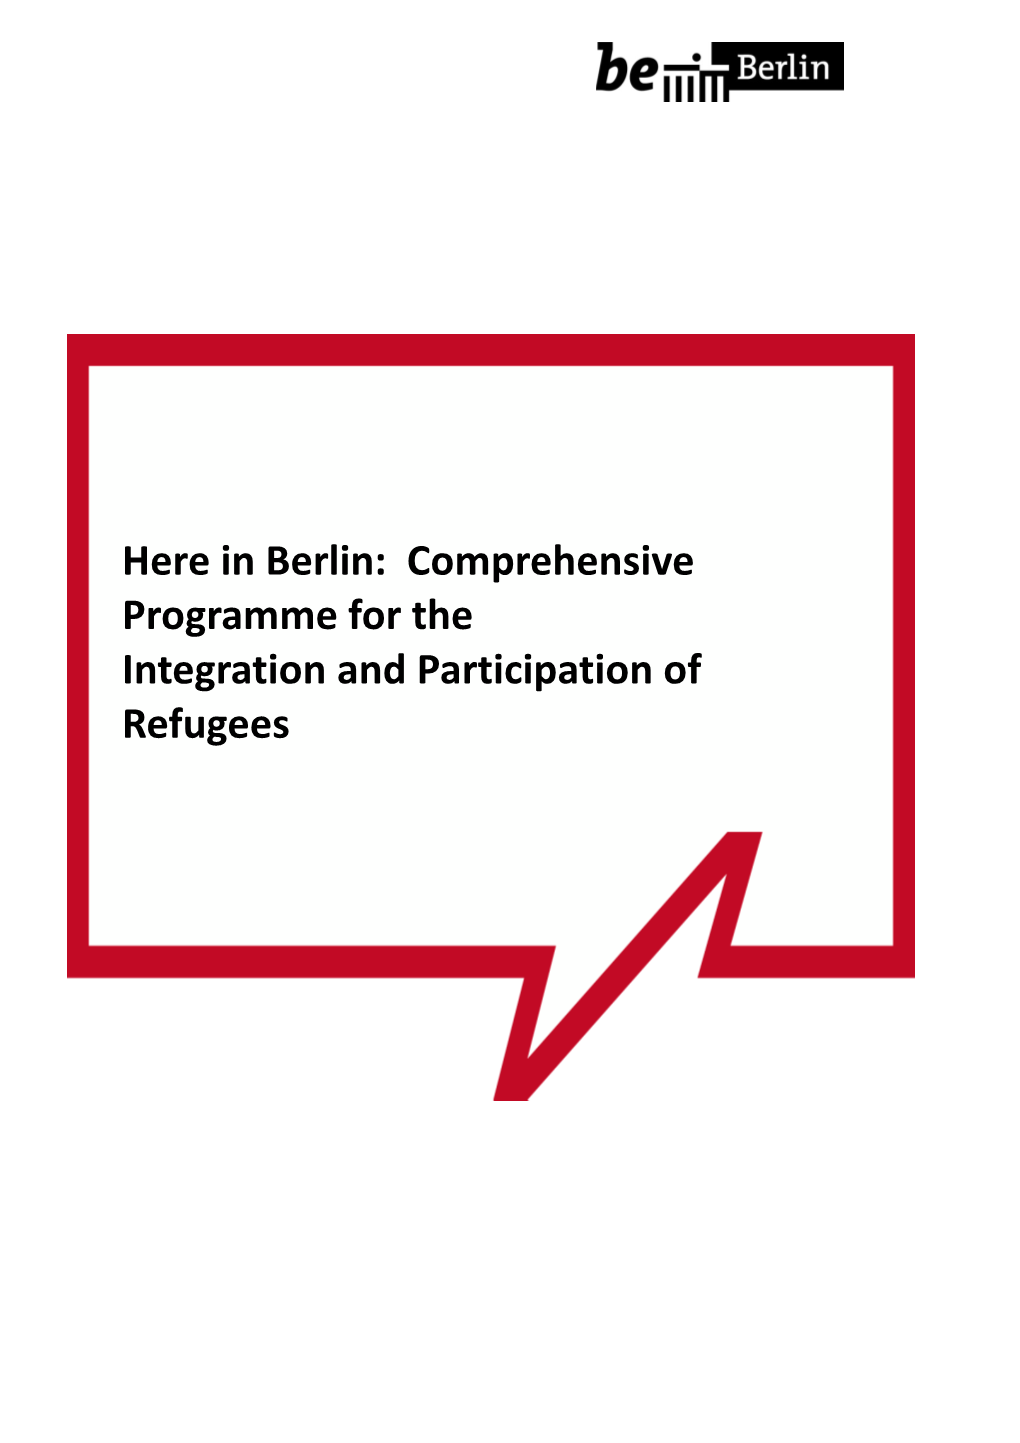 Comprehensive Programme for the Integration and Participation of Refugees